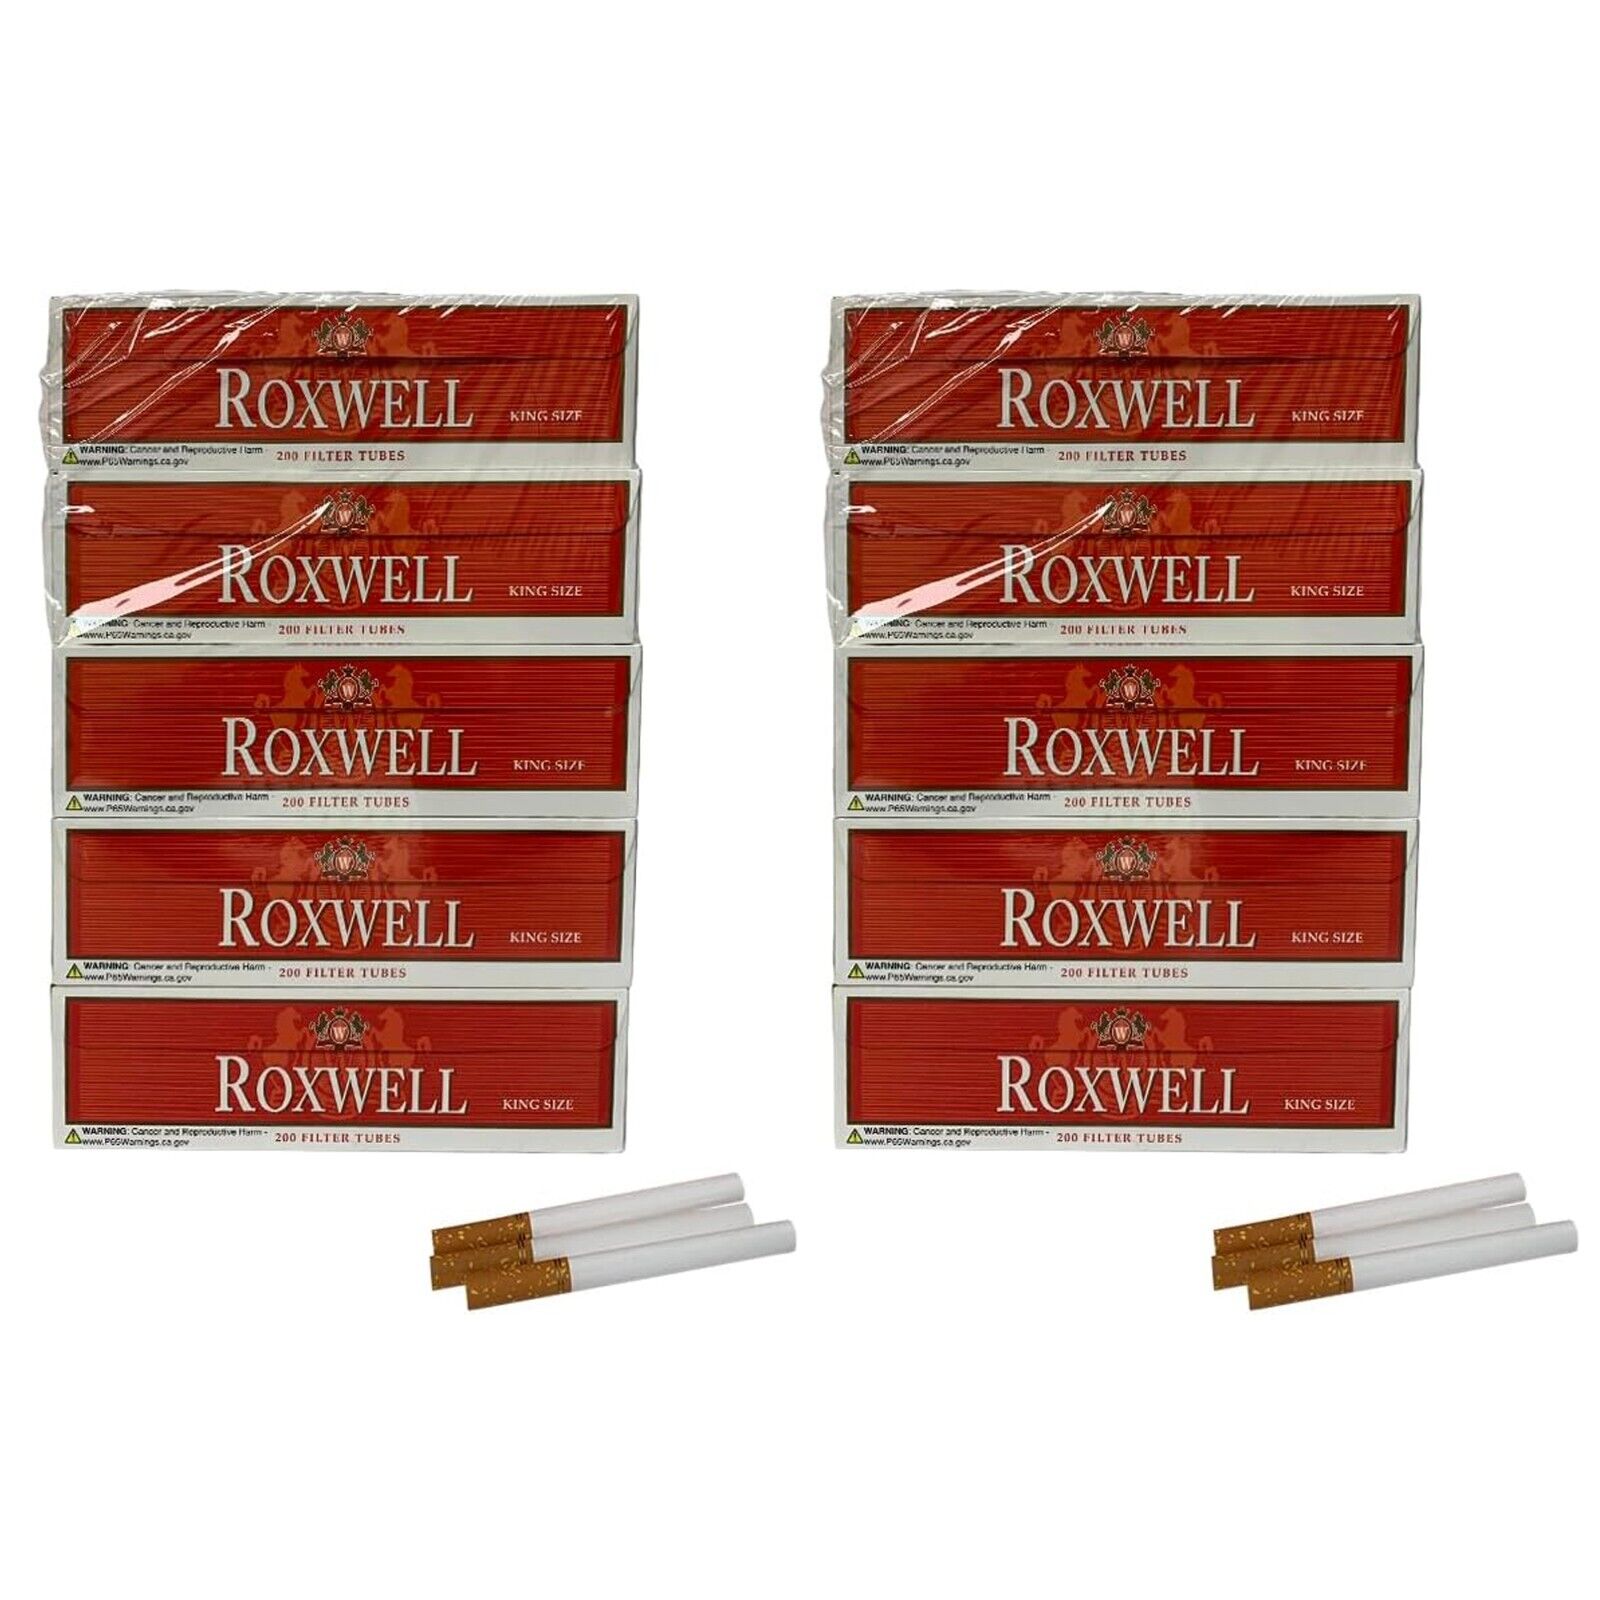 Roxwell Cigarette Tubes King Size Original Red Superior Quality 10 Box of 200 Ct